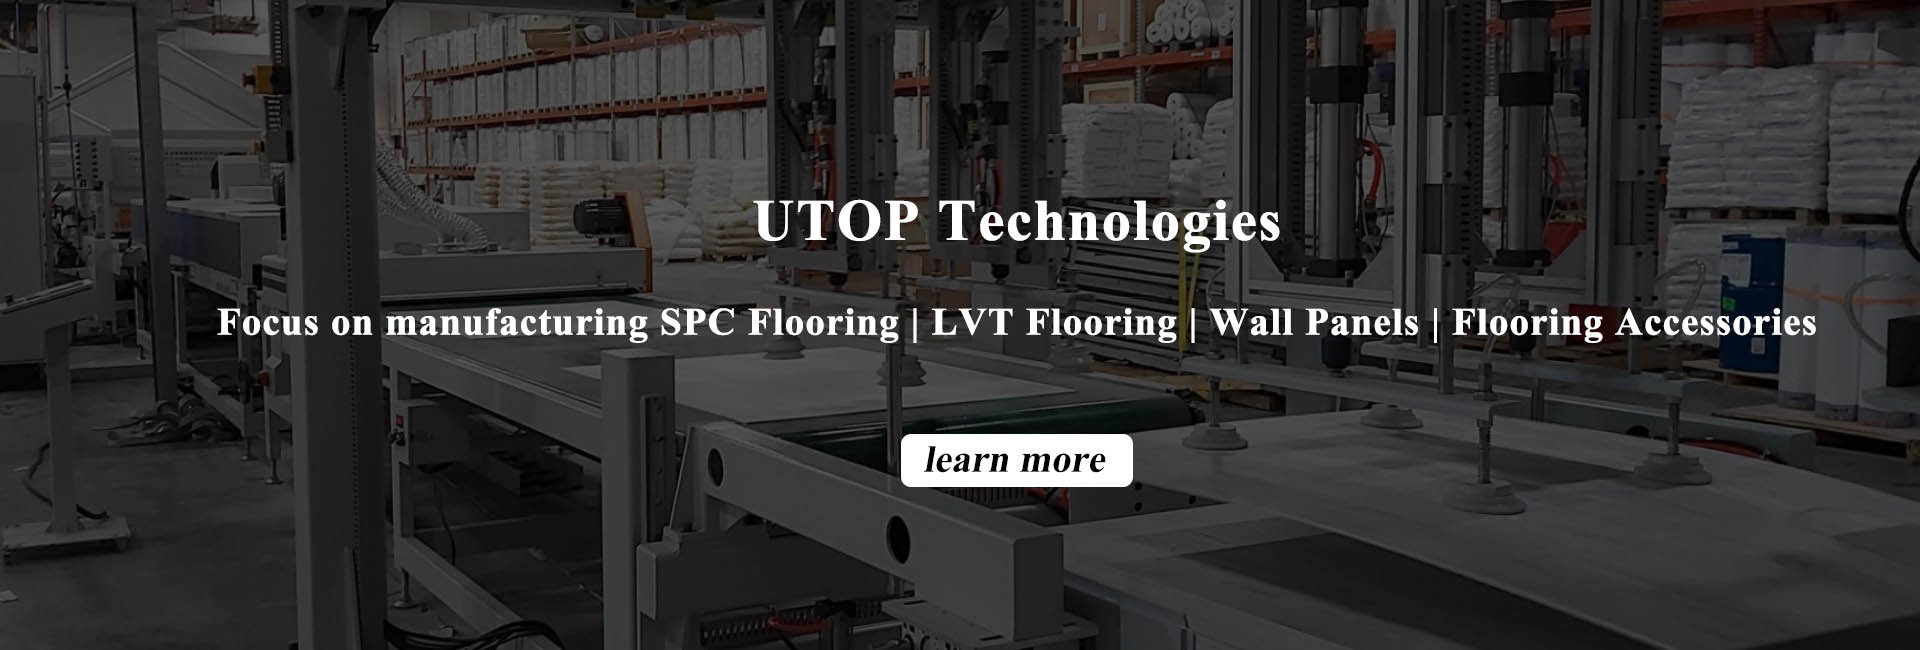 spc flooring made in China